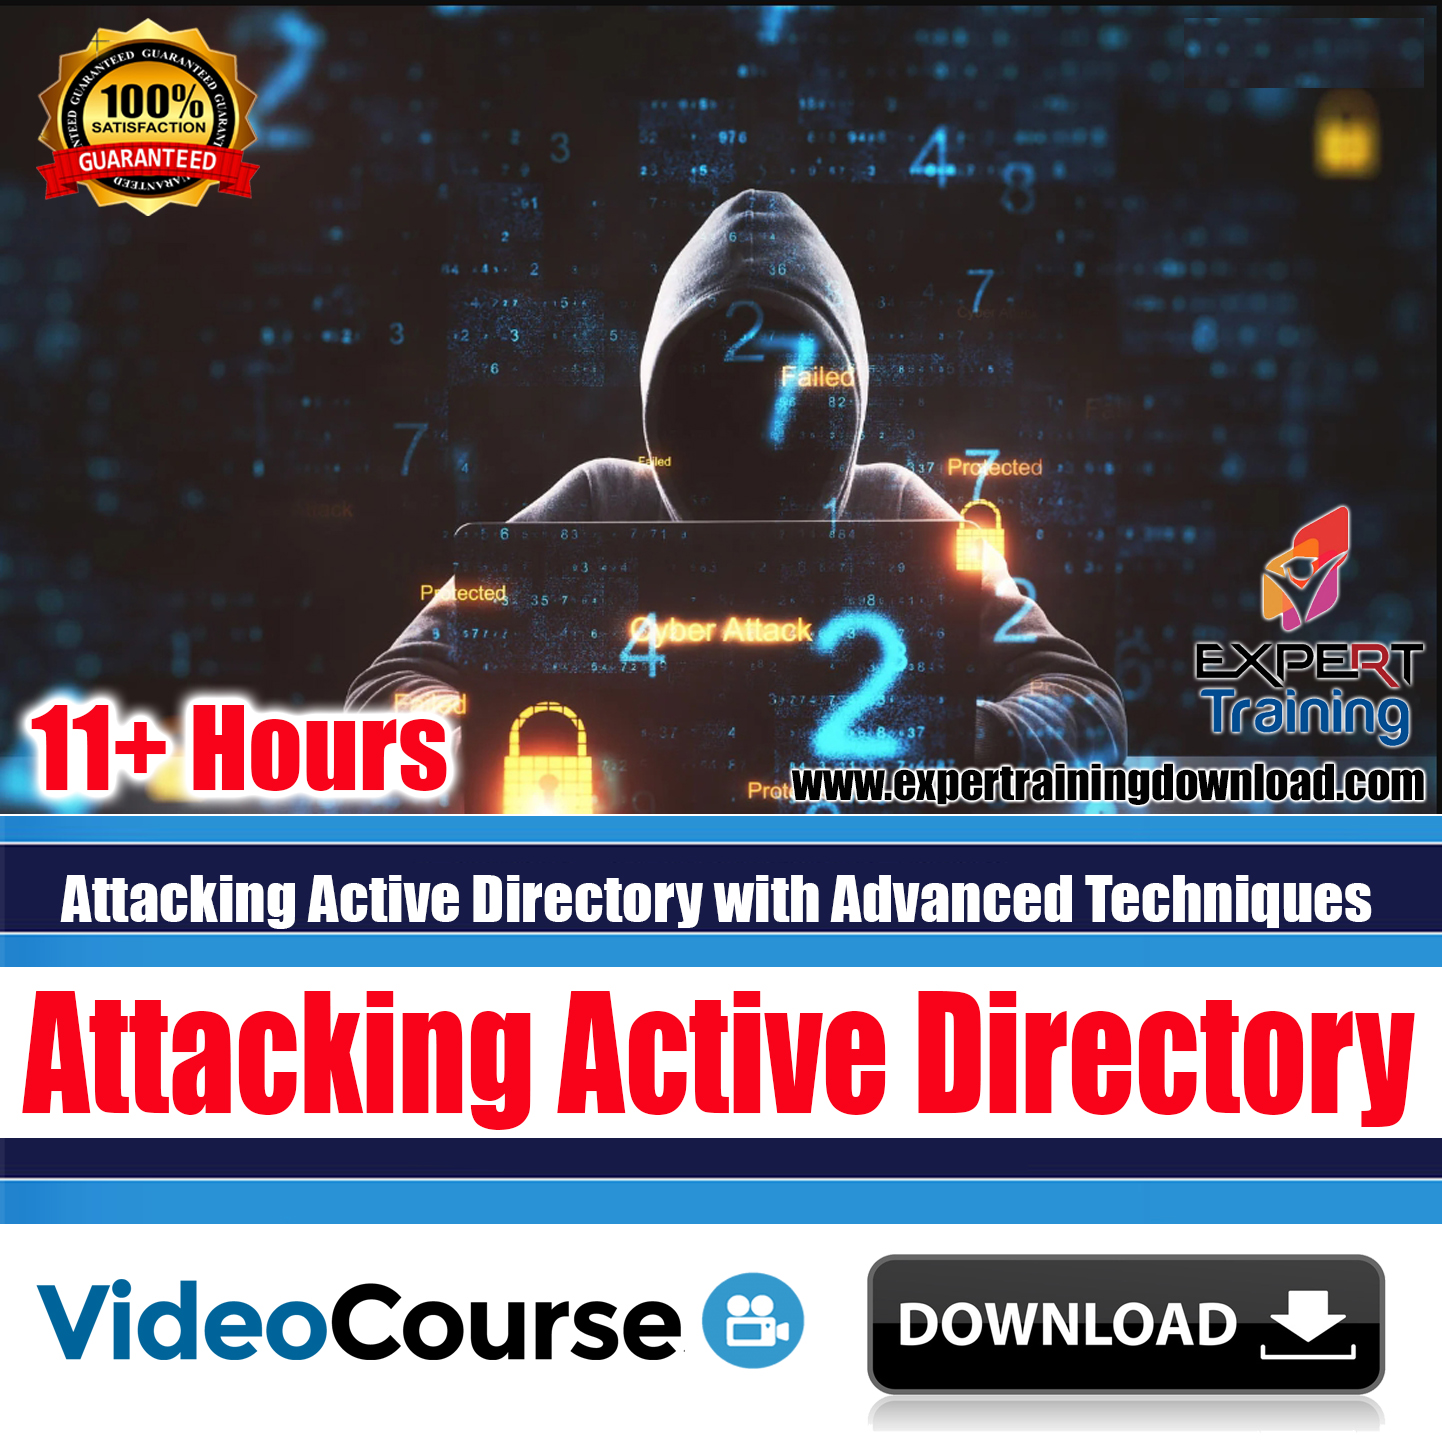 Attacking Active Directory with Advanced Techniques